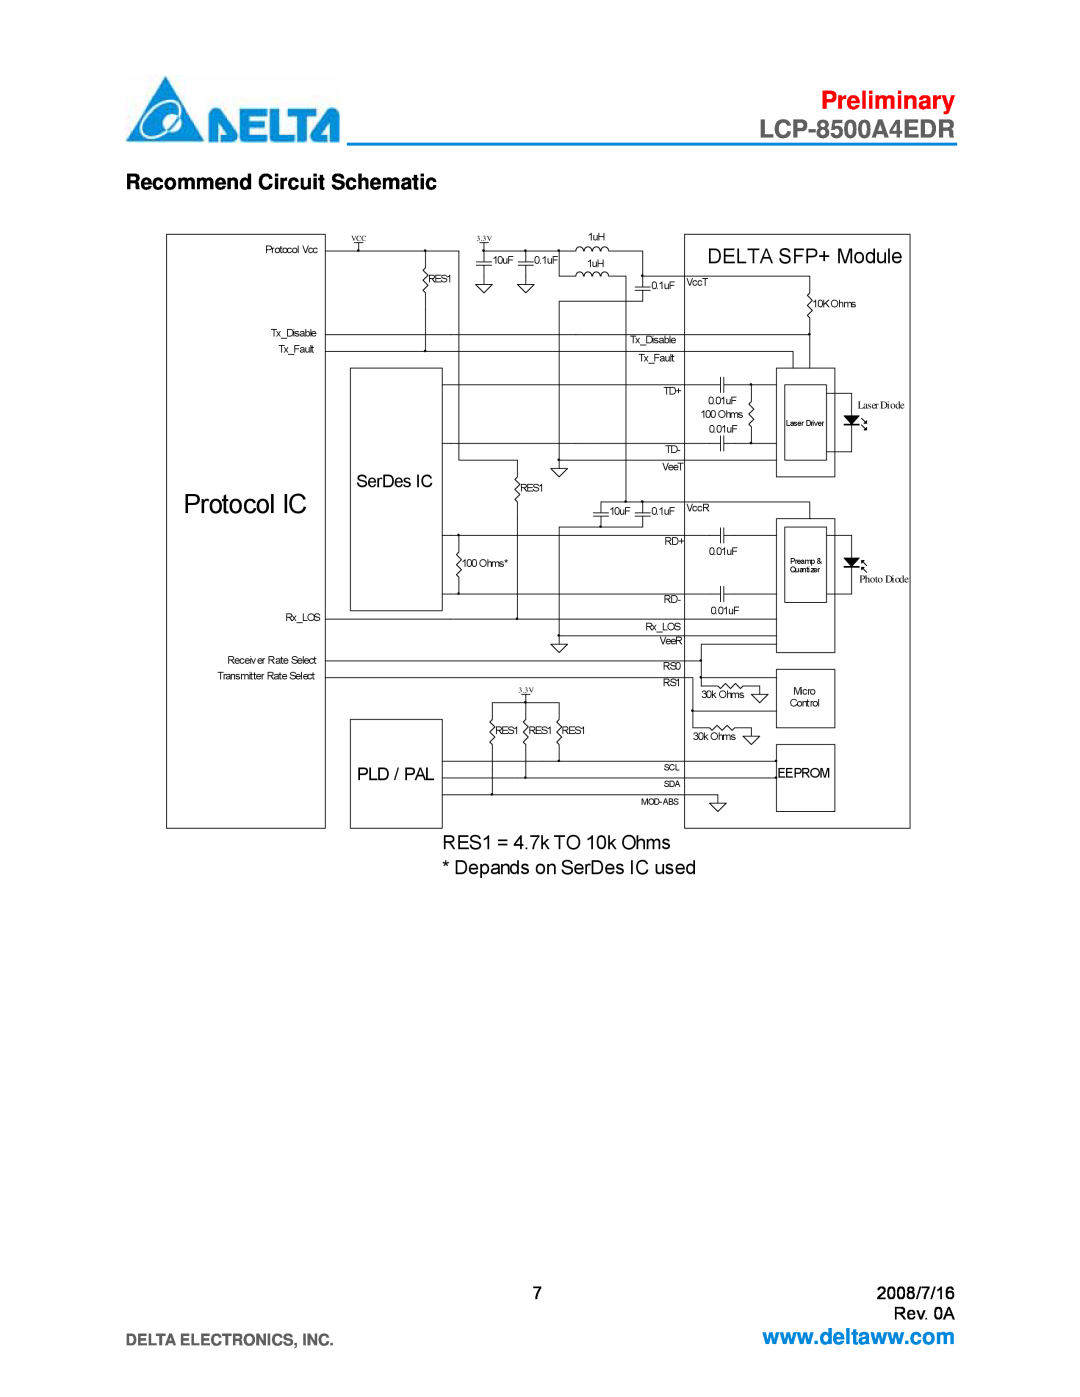 Delta Electronics LCP-8500A4EDR manual Recommend Circuit Schematic, Protocol IC, Preliminary, DELTA SFP+ Module, SerDes IC 